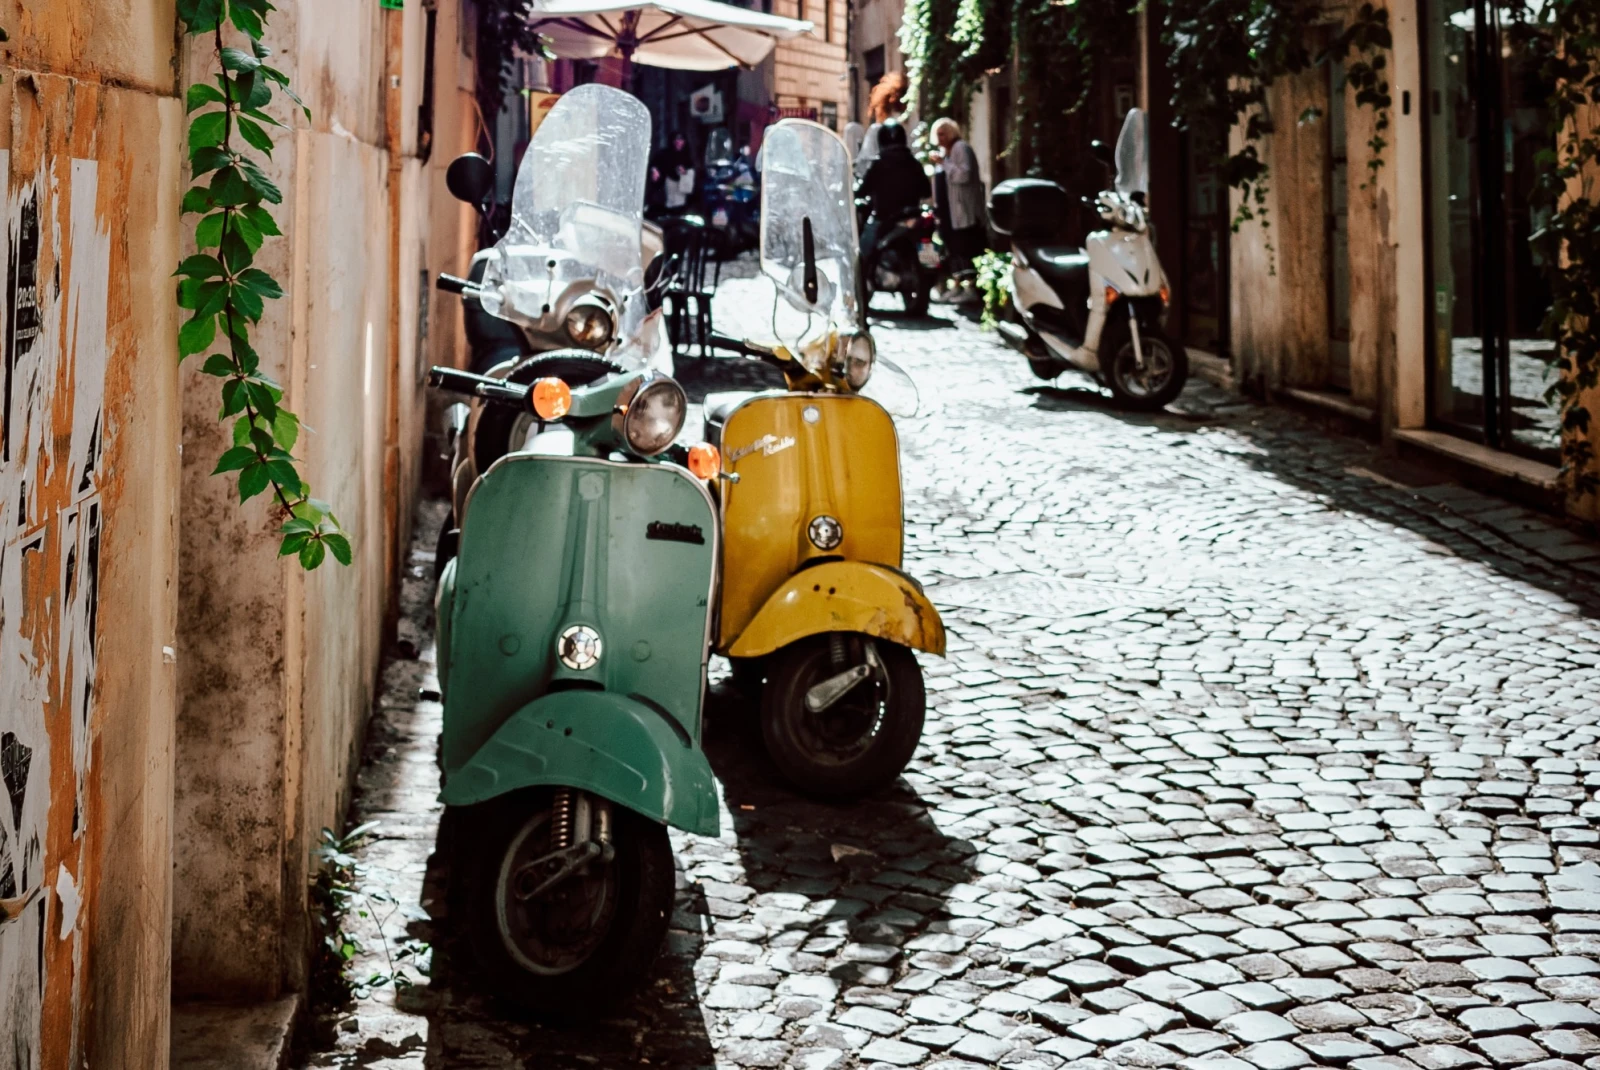 yellow and turquoise vespas side-by-side in a charming, sun-lit alley